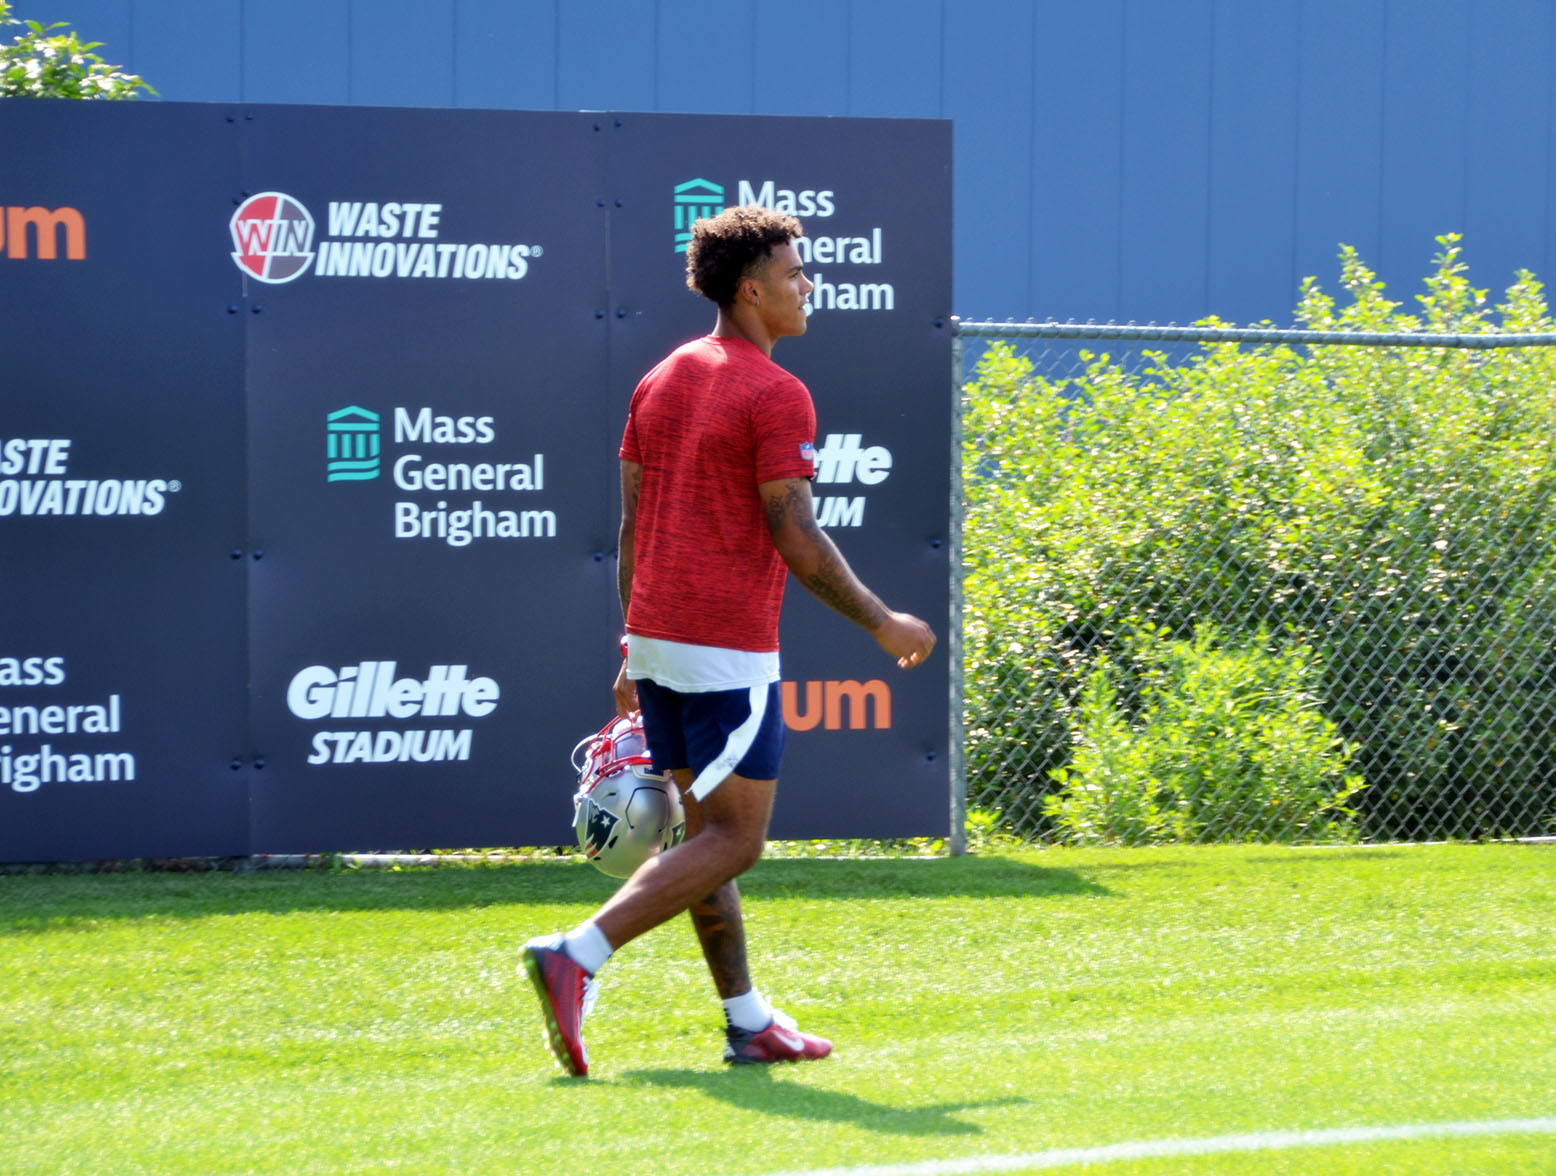 Christian Gonzalez at 2023 New England Patriots training camp in Foxboro. (Jim Louth/98.5 The Sports Hub)